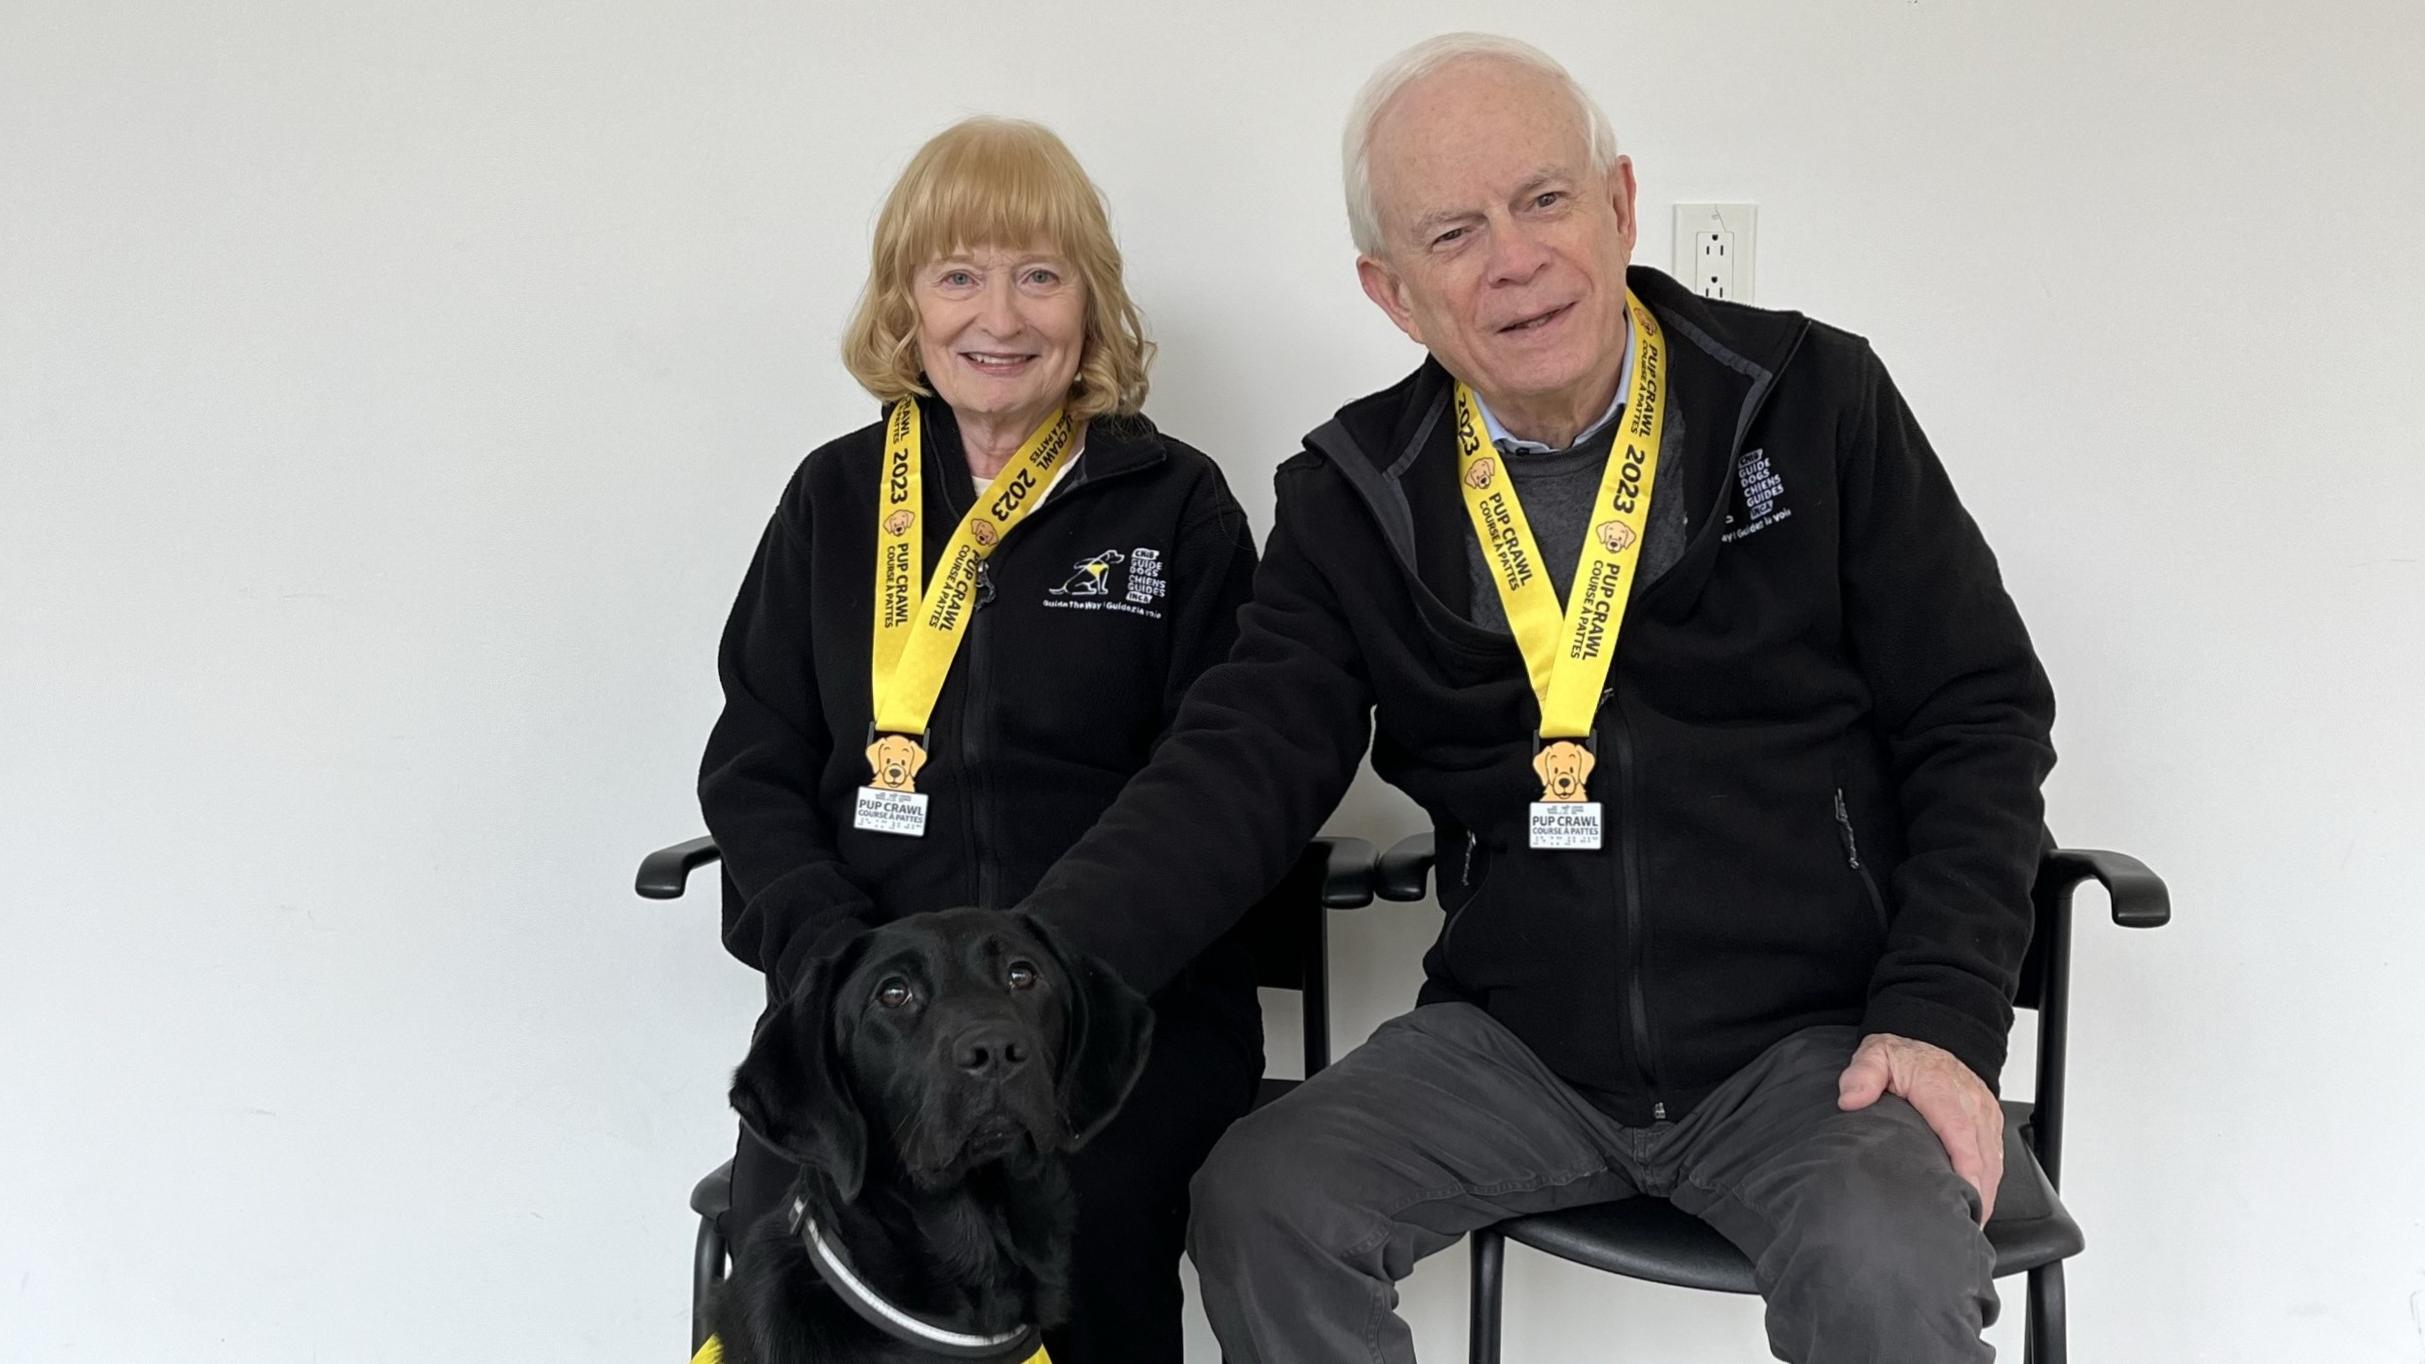 Mary and John Crocker sit to pose wearing 2023 Pup Crawl medals. They are accompanied by a black Labrador Retriever wearing a CNIB Guide Dogs vest.